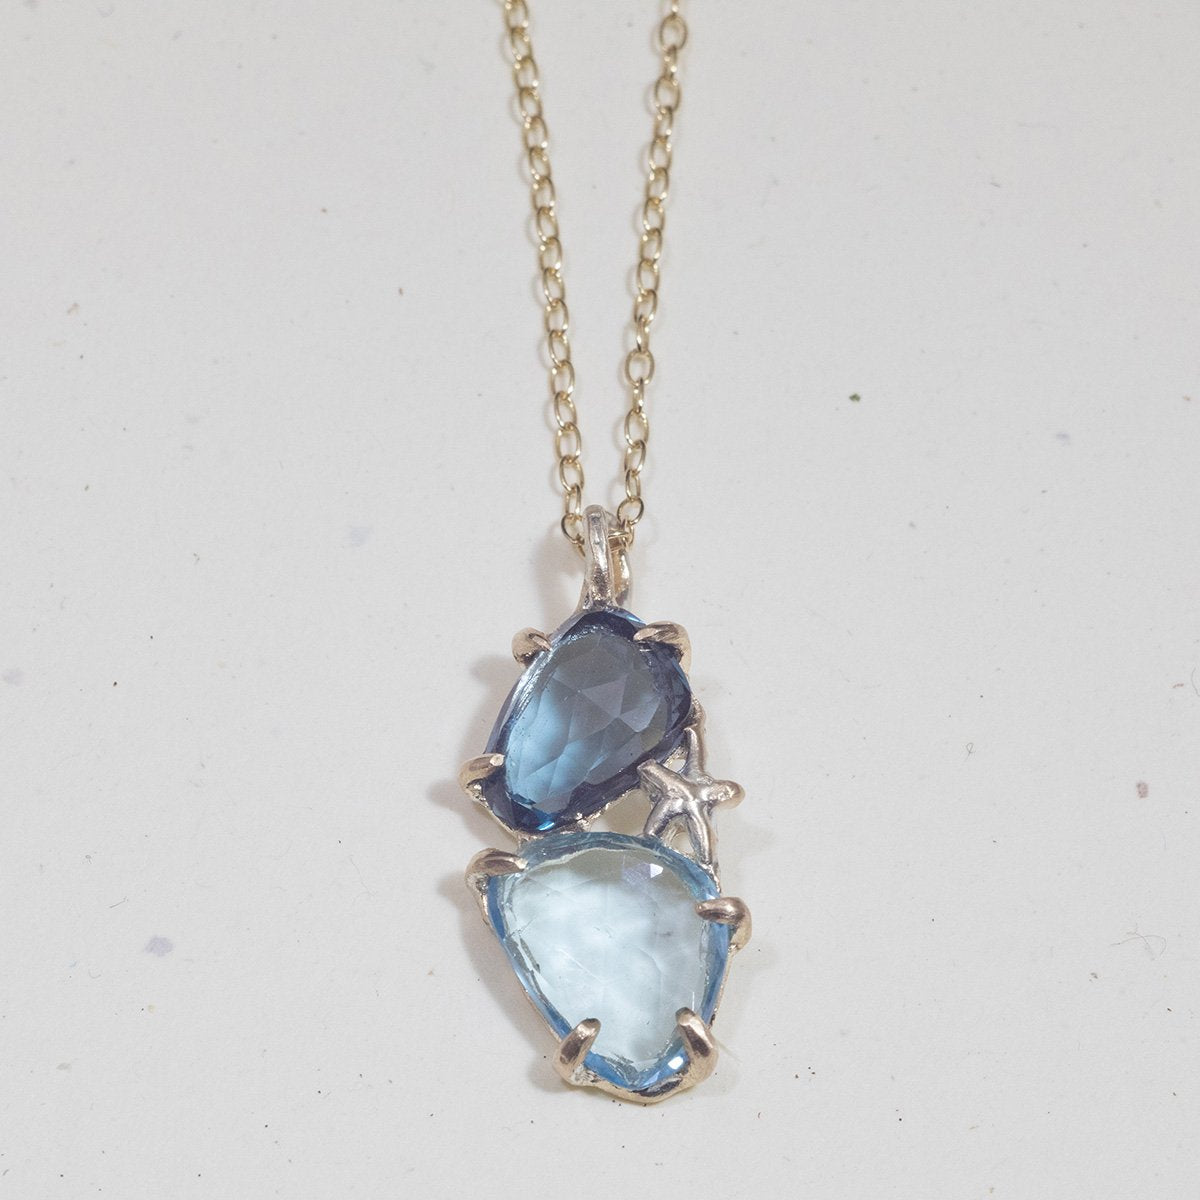 2 Shades of Blue Topaz with Golden Star Necklace (10k)